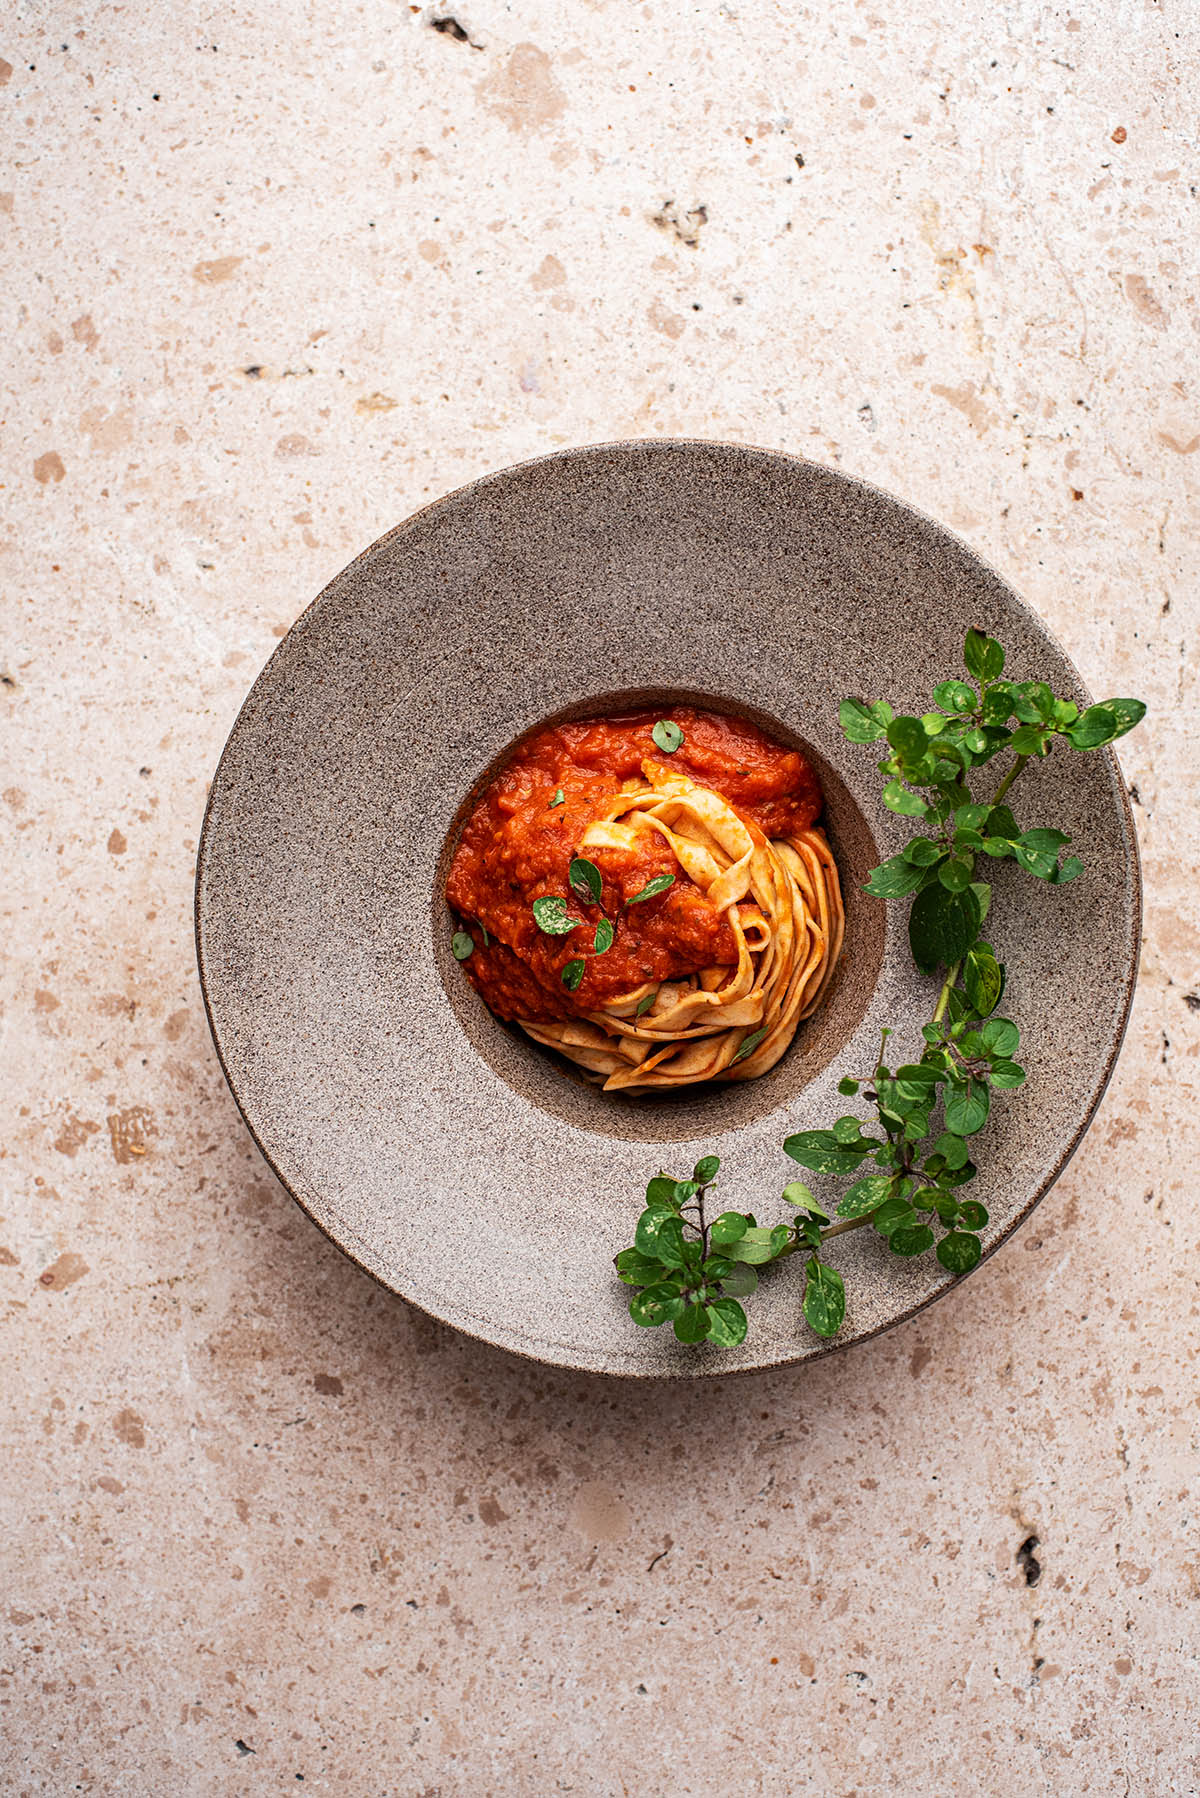 Pasta in a bowl with tomato sauce and oregano.